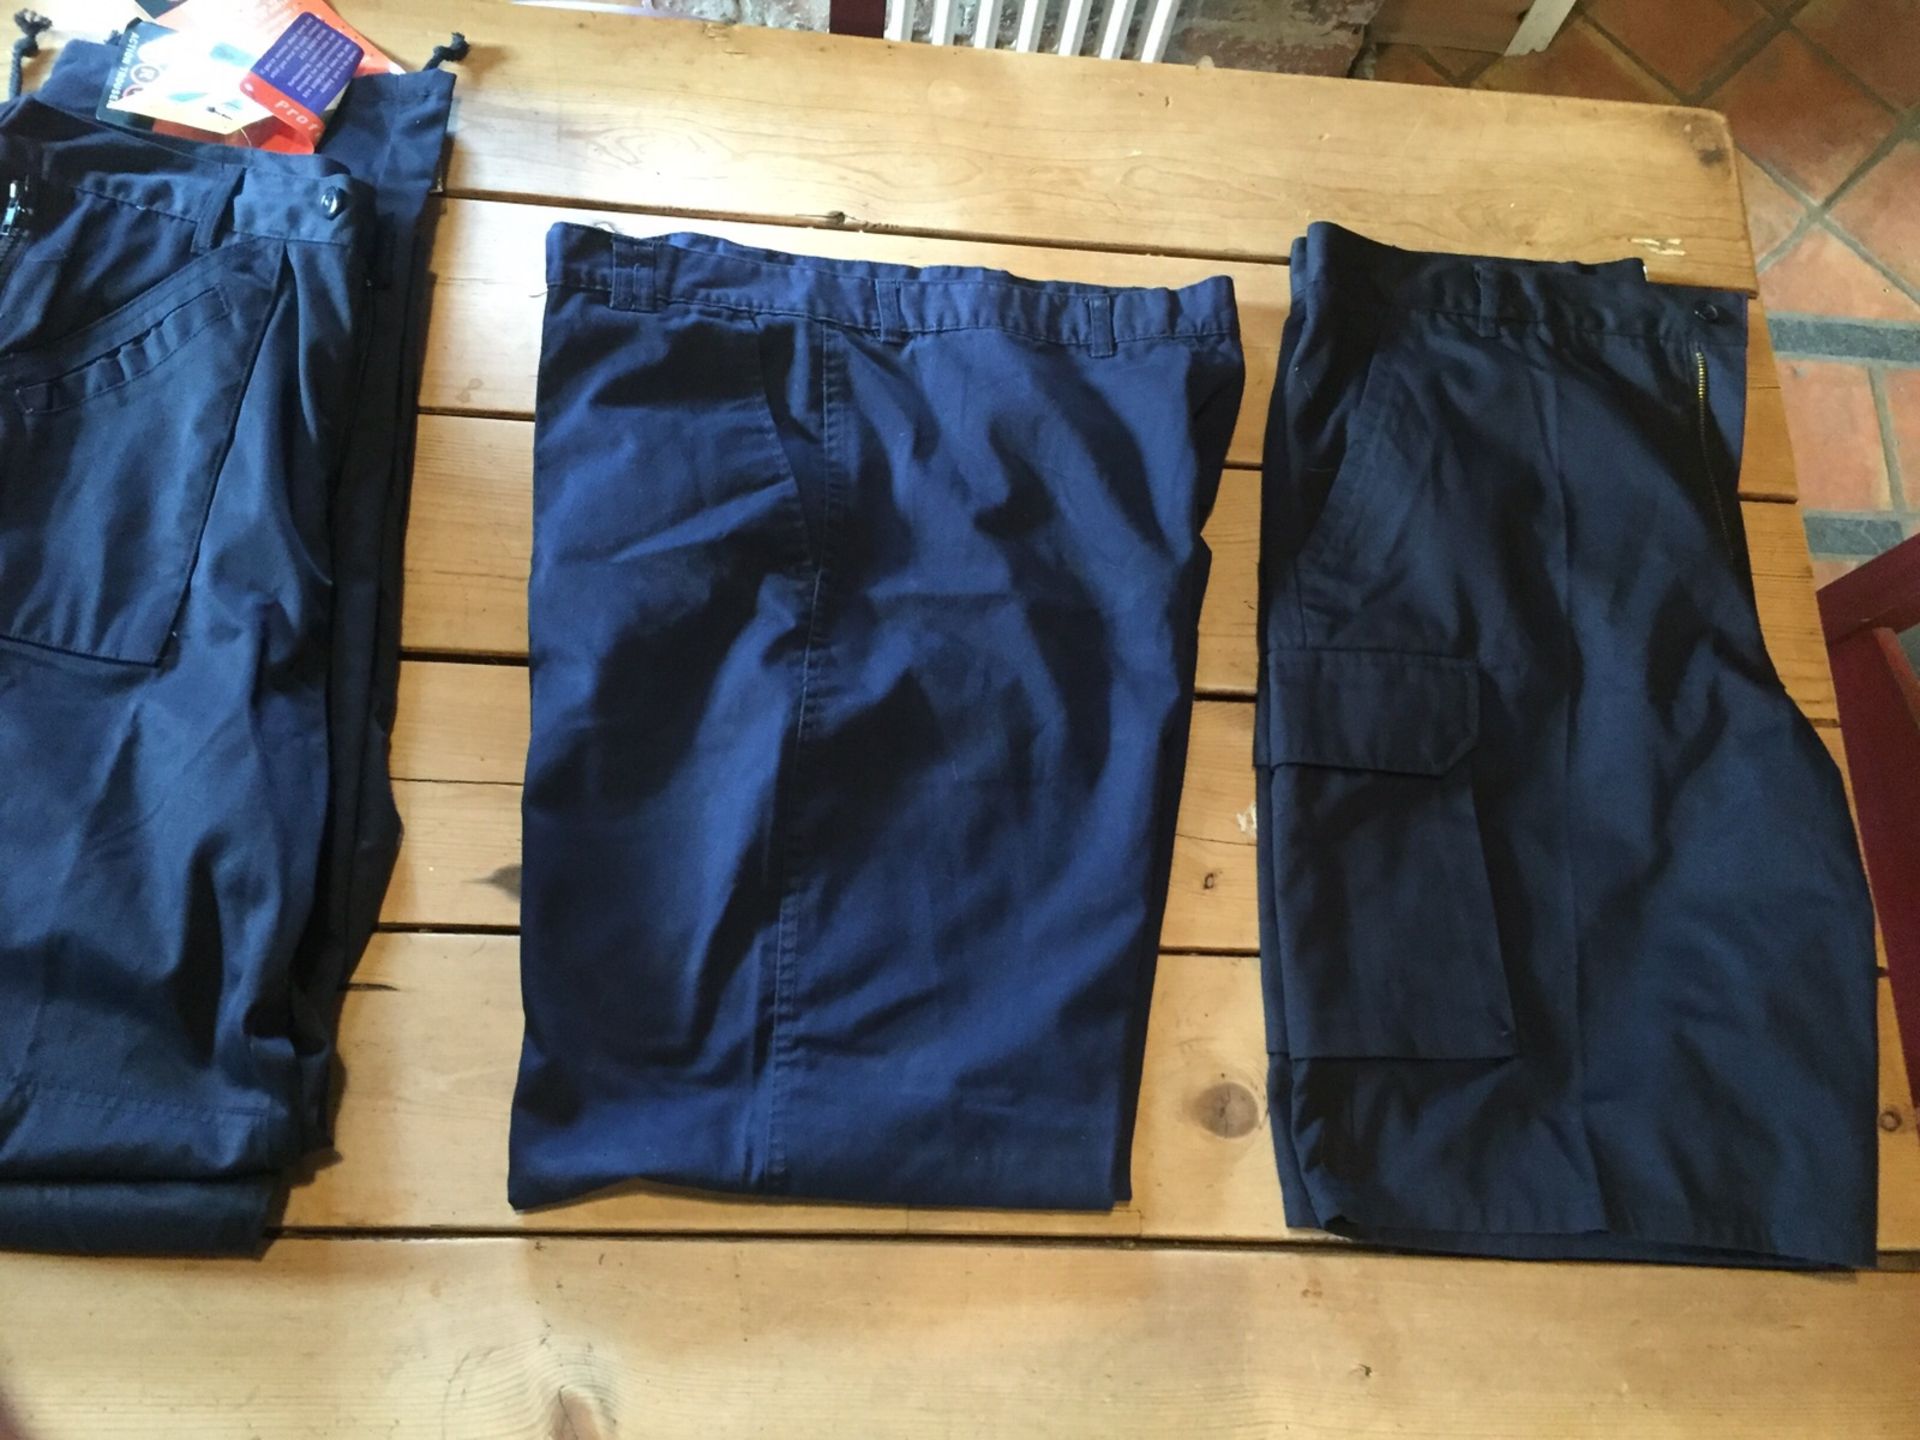 Job Lot 62 Pairs of Brand New mens UNEEK work trousers various sizes in blue - Image 8 of 10